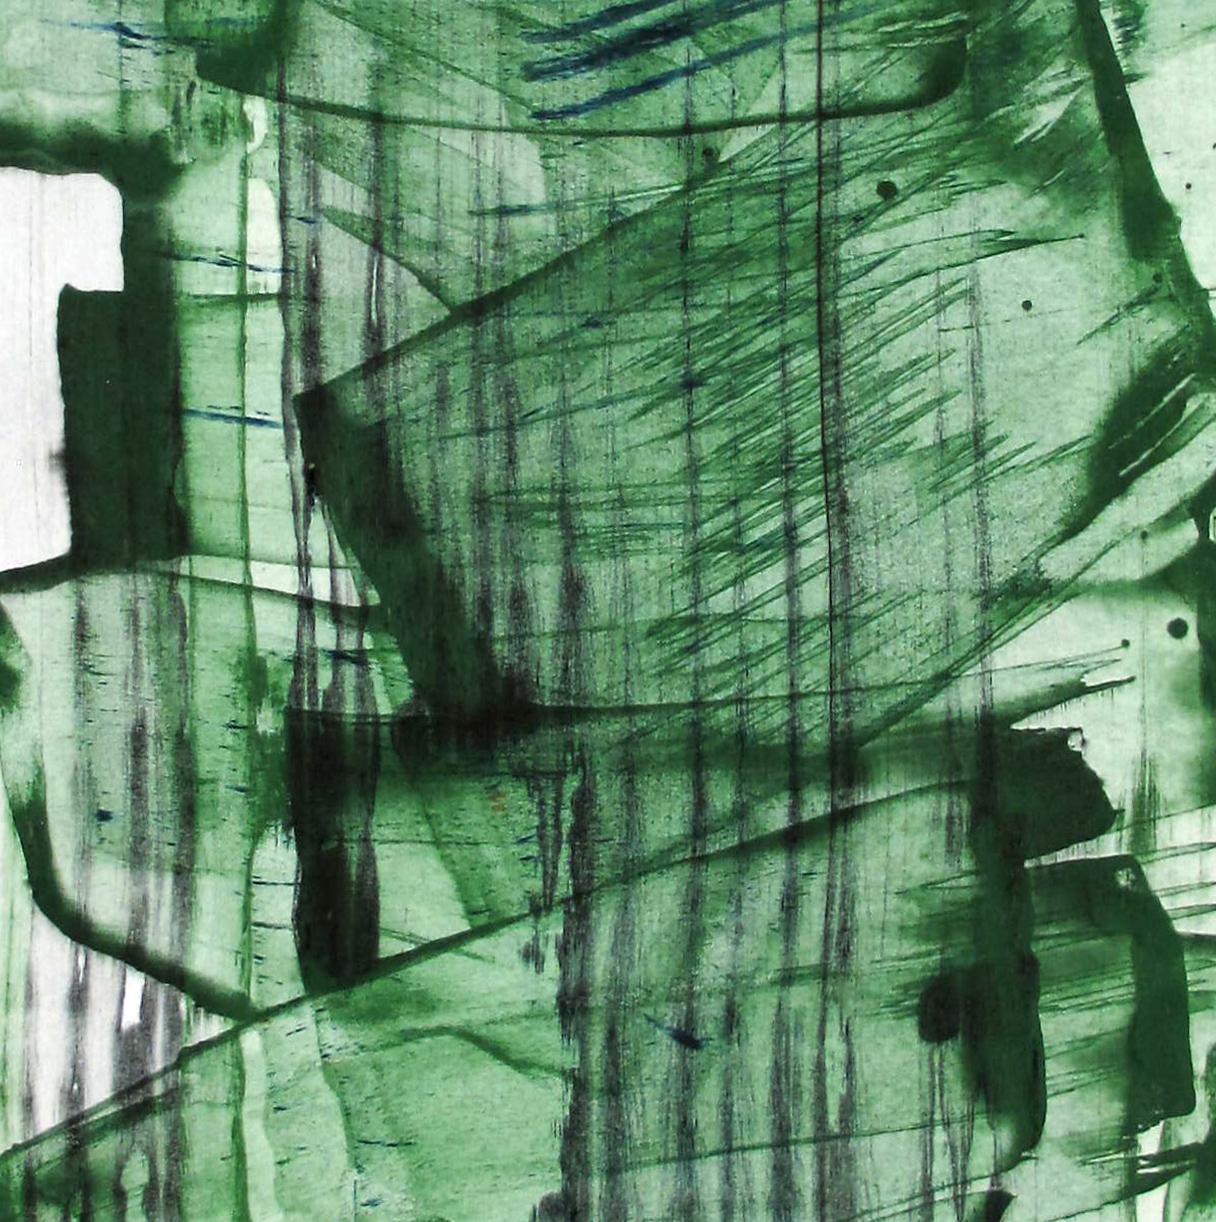 Mad green 9 (Abstract Painting)
Acrylic and pigments on paper — Unframed.

Emma Godebska is a French abstract artist living in Nimes, France.

Her use of natural pigments, reflective of nature itself, is in dialogue with diluted acrylic paint and